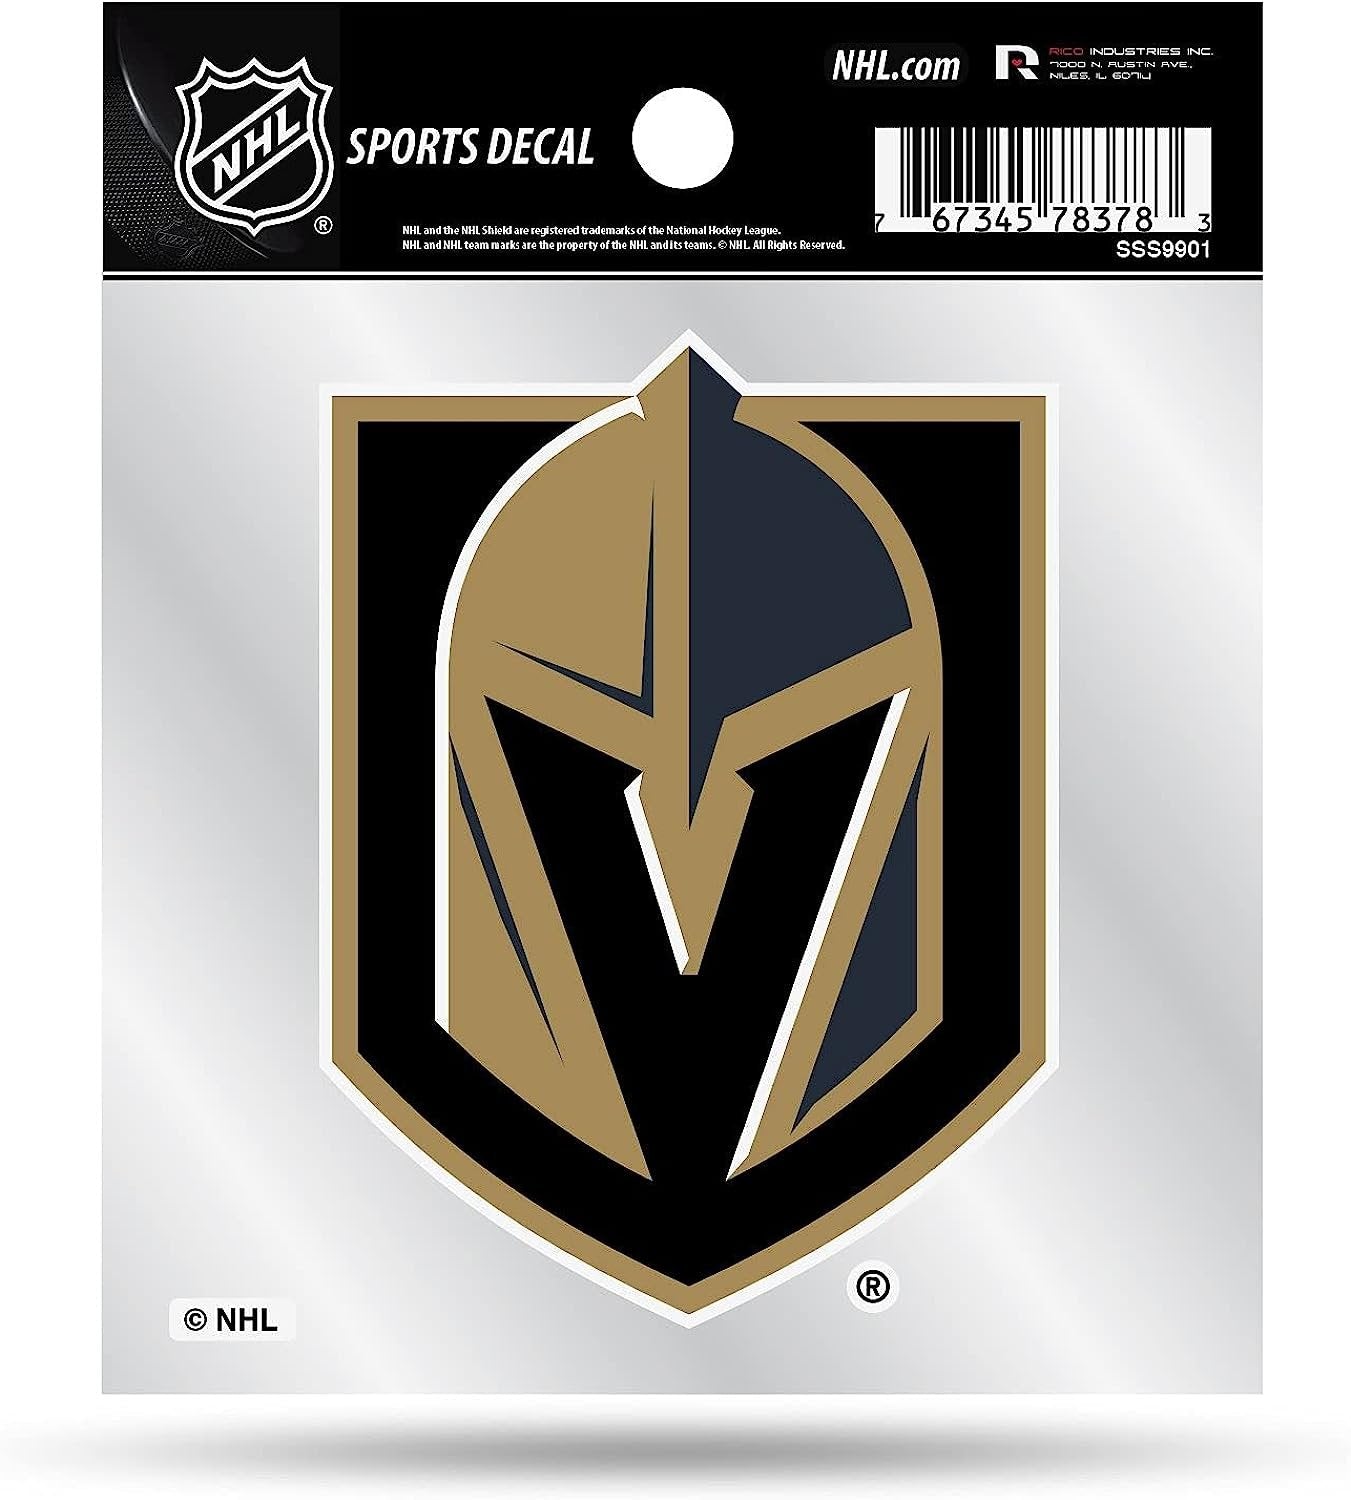 Vegas Golden Knights 4x4 Inch Die Cut Decal Sticker, Primary Logo, Clear Backing